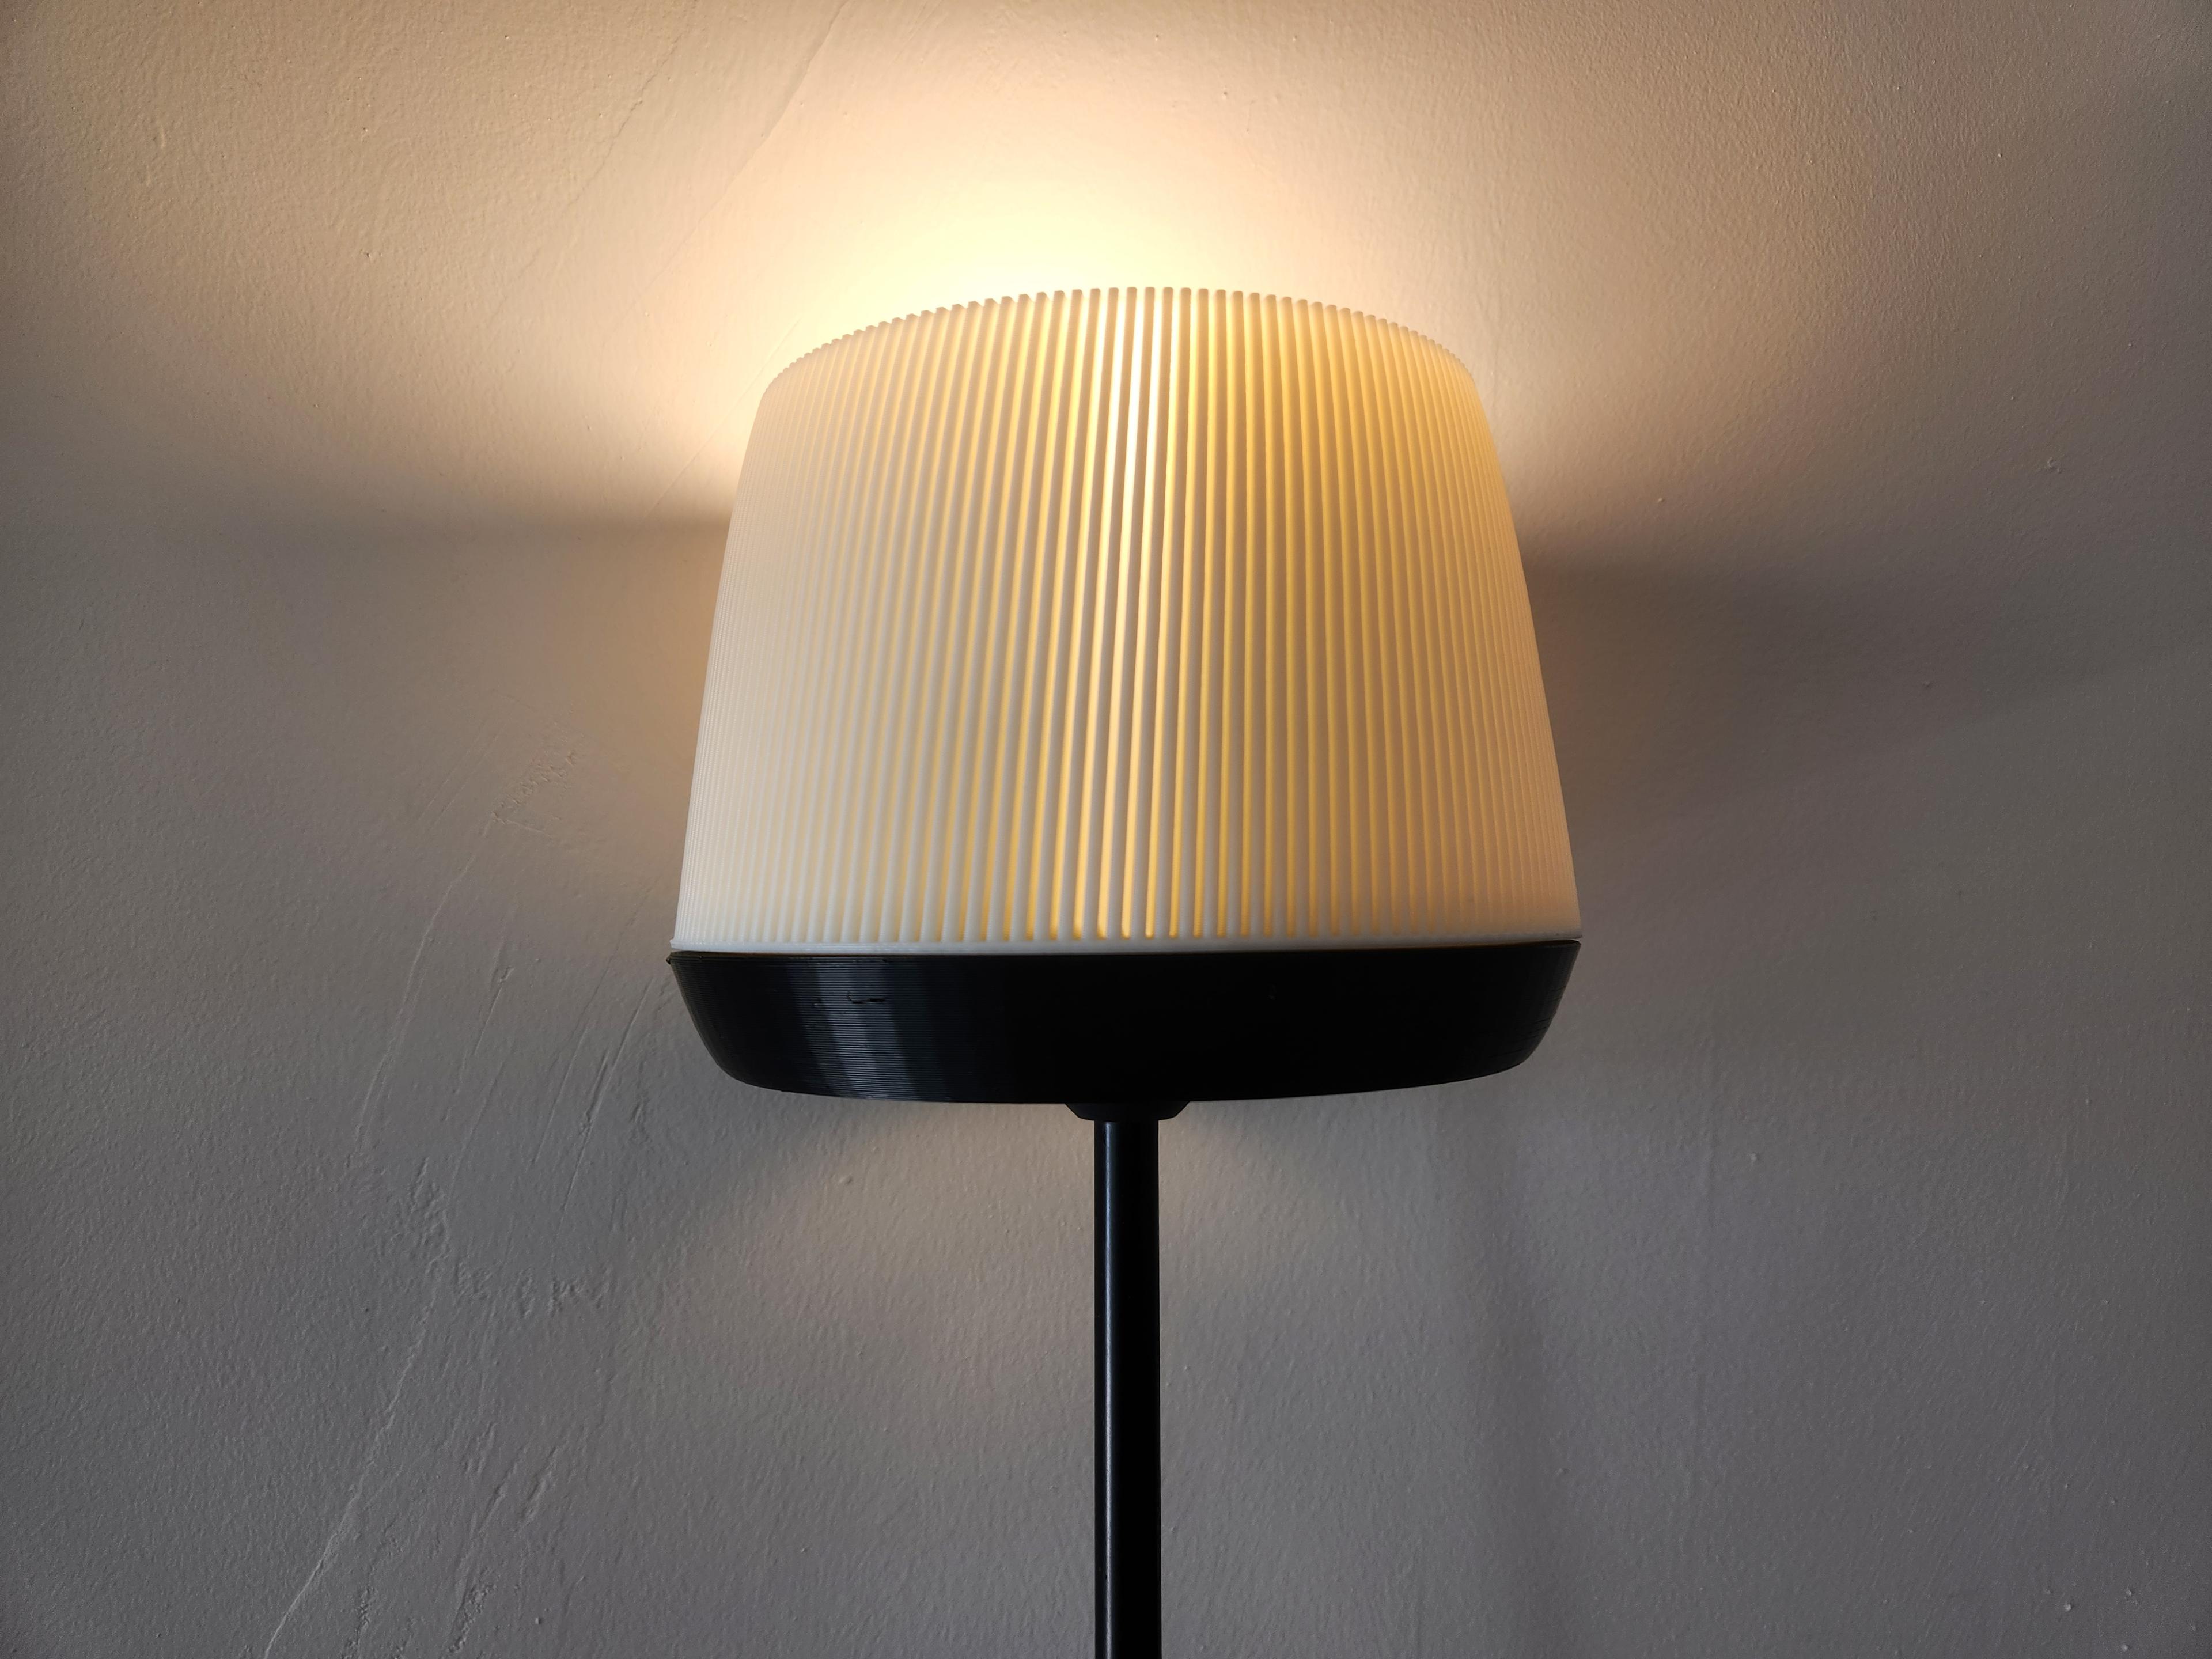  Lampshade for Ikea Holmö or any standard E27 socket  3d model